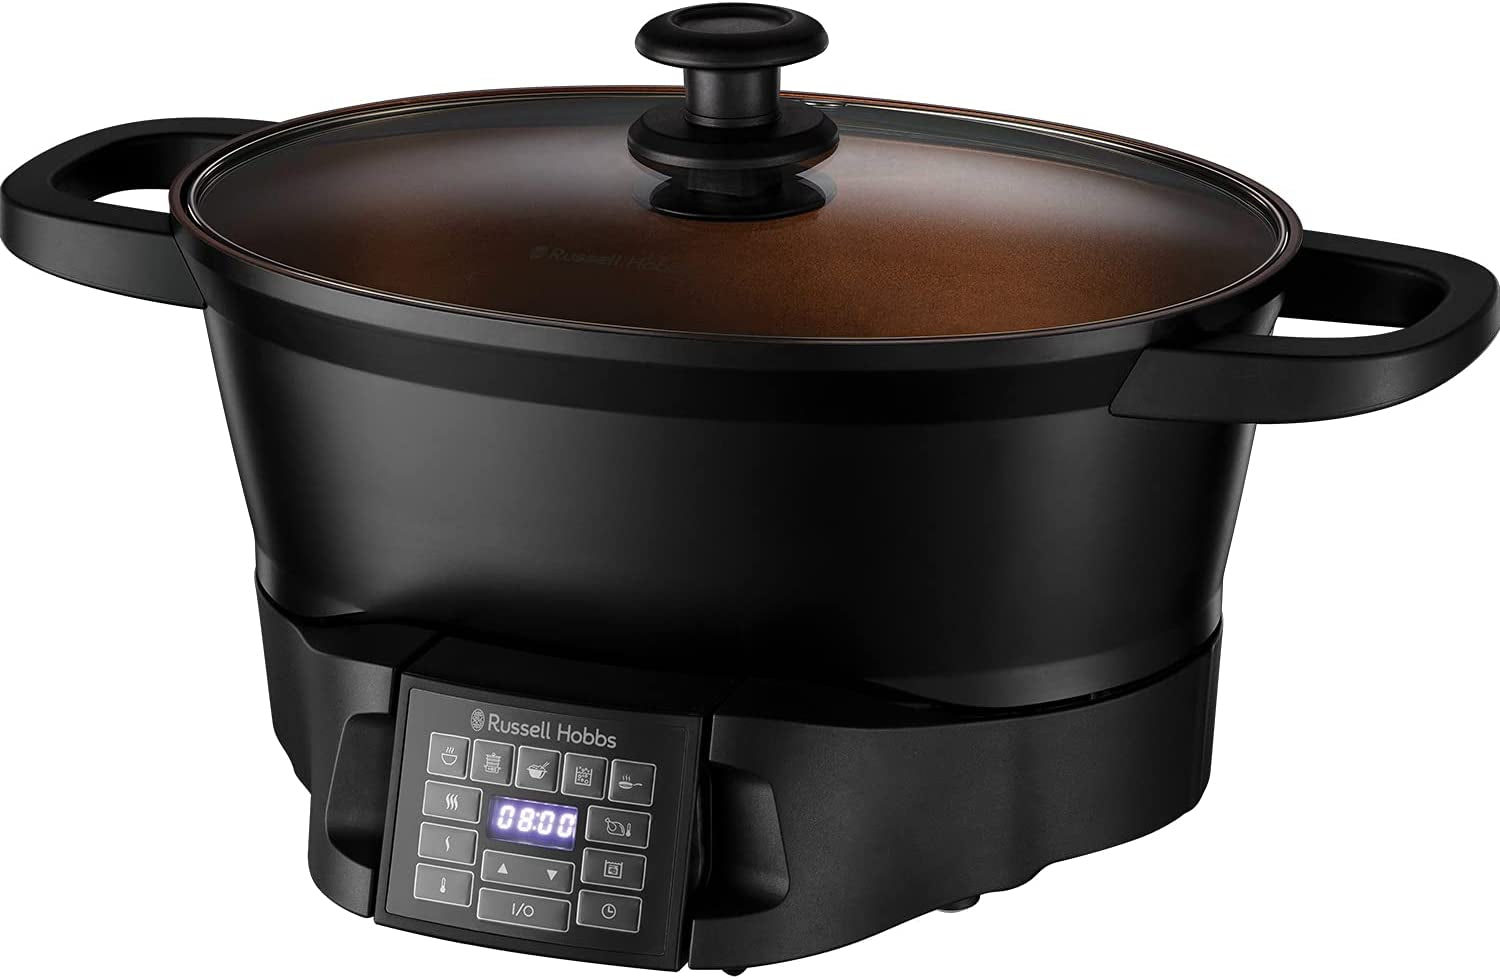 28270 Good-To-Go Multicooker - 8 Versatile Functions Including Slow Cooker, Sous Vide, Rice and Food Steamer, Black, 750 Watt